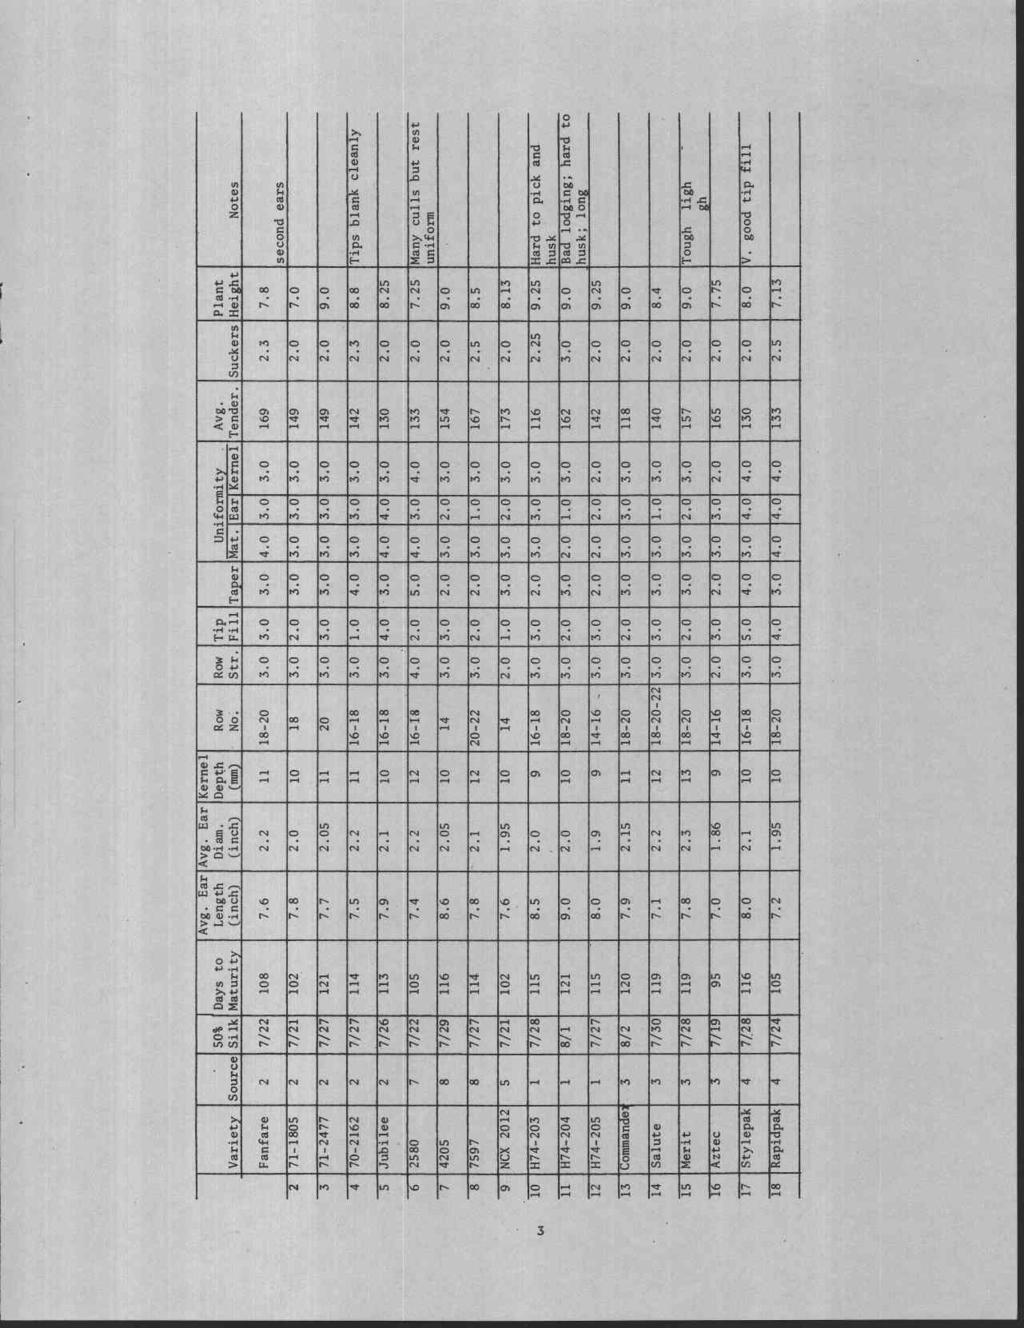 Table 1. Characteristics of Sweet Corn Varieties Observed at Corvallis, Oregon, 19751 No. Variety Source 50% Silk Days to Maturity Avg. Ear Length (inch) Avg. Ear Diam.